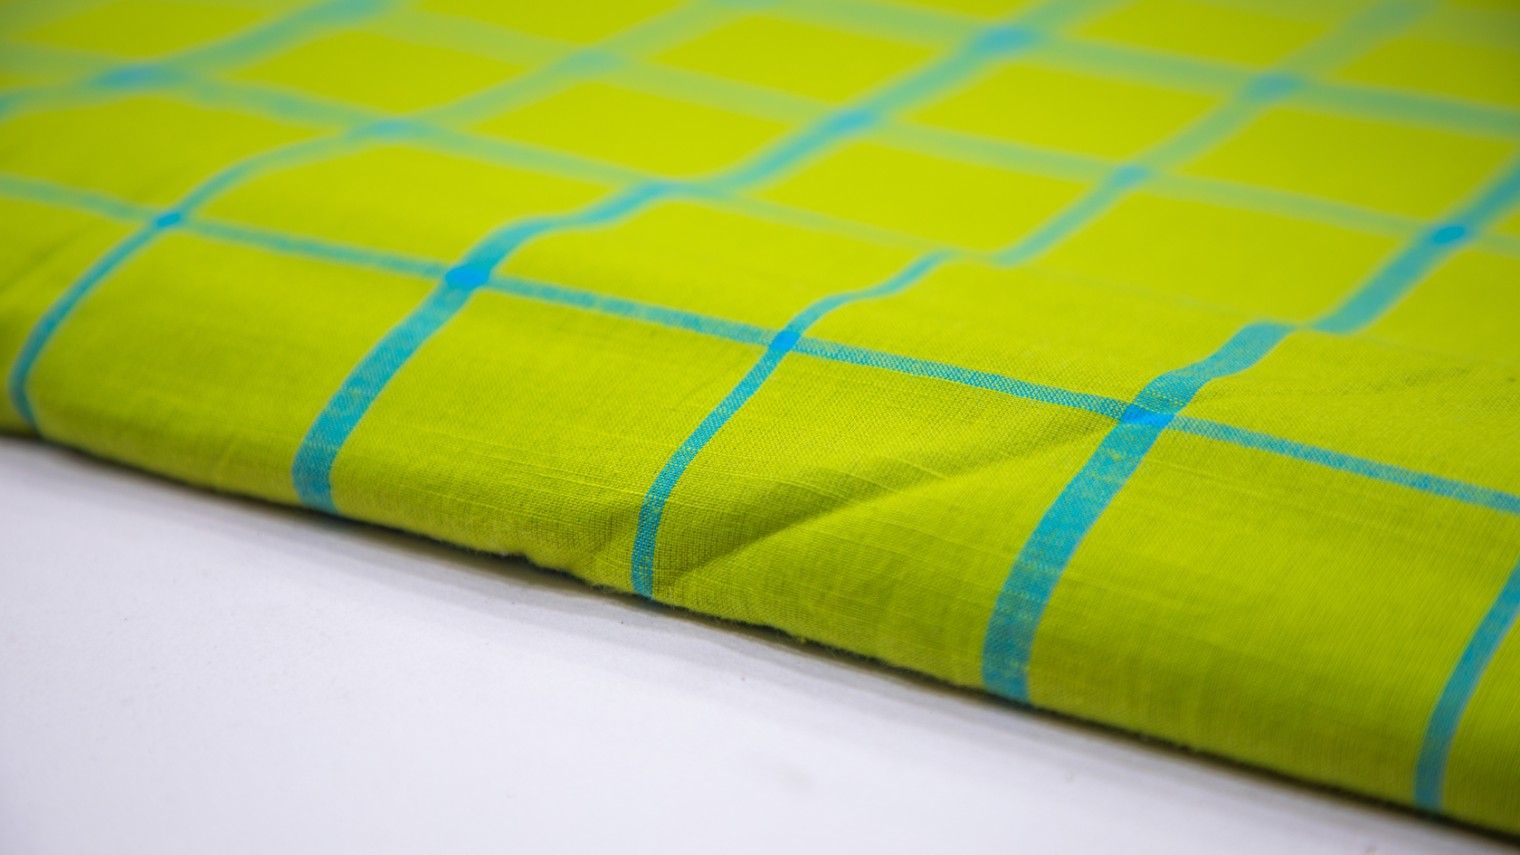 Bright Olive Green Color South Cotton Handloom Blue Chex Weave Fabric - 4280